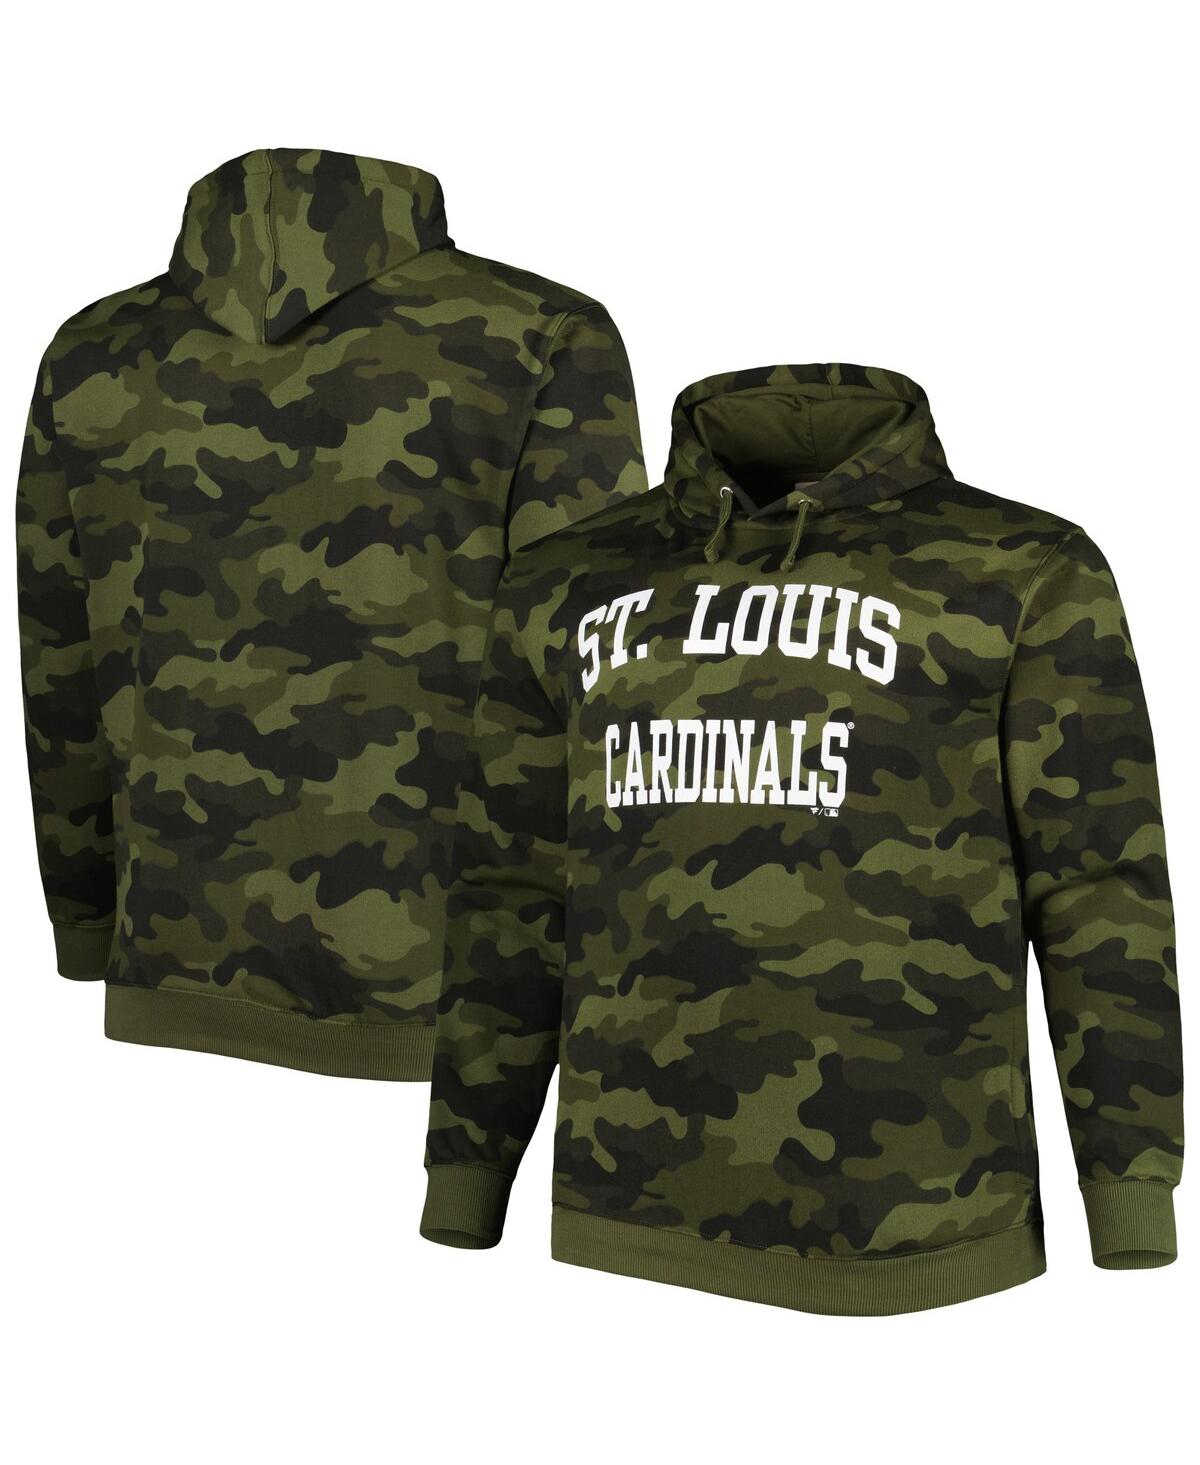 PROFILE MEN'S CAMO ST. LOUIS CARDINALS ALLOVER PRINT BIG AND TALL PULLOVER HOODIE